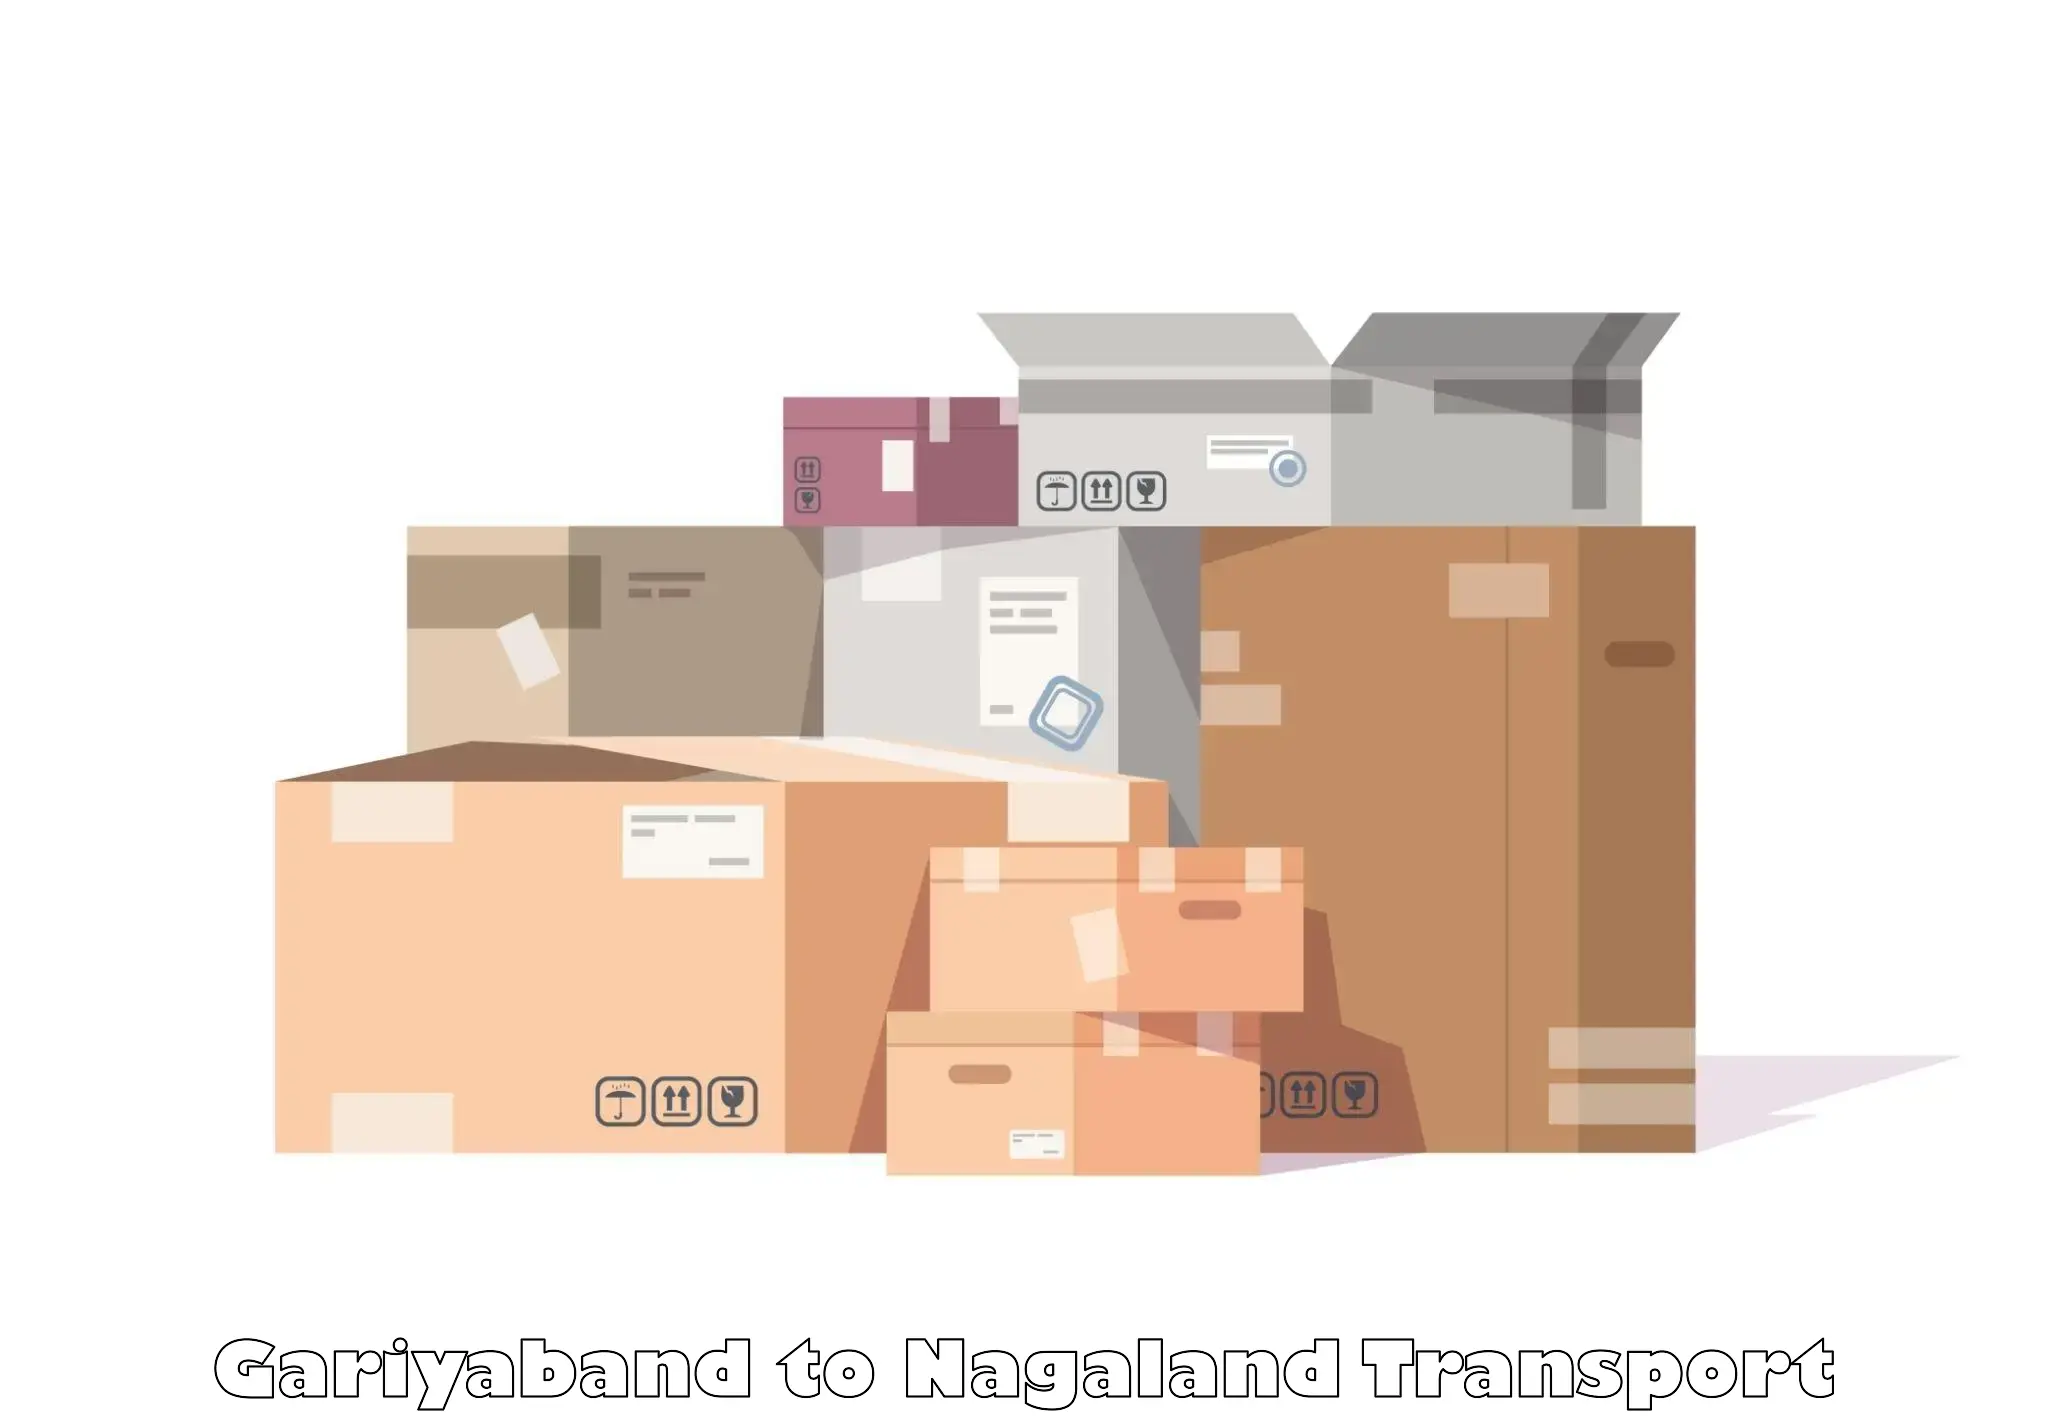 Package delivery services in Gariyaband to Nagaland